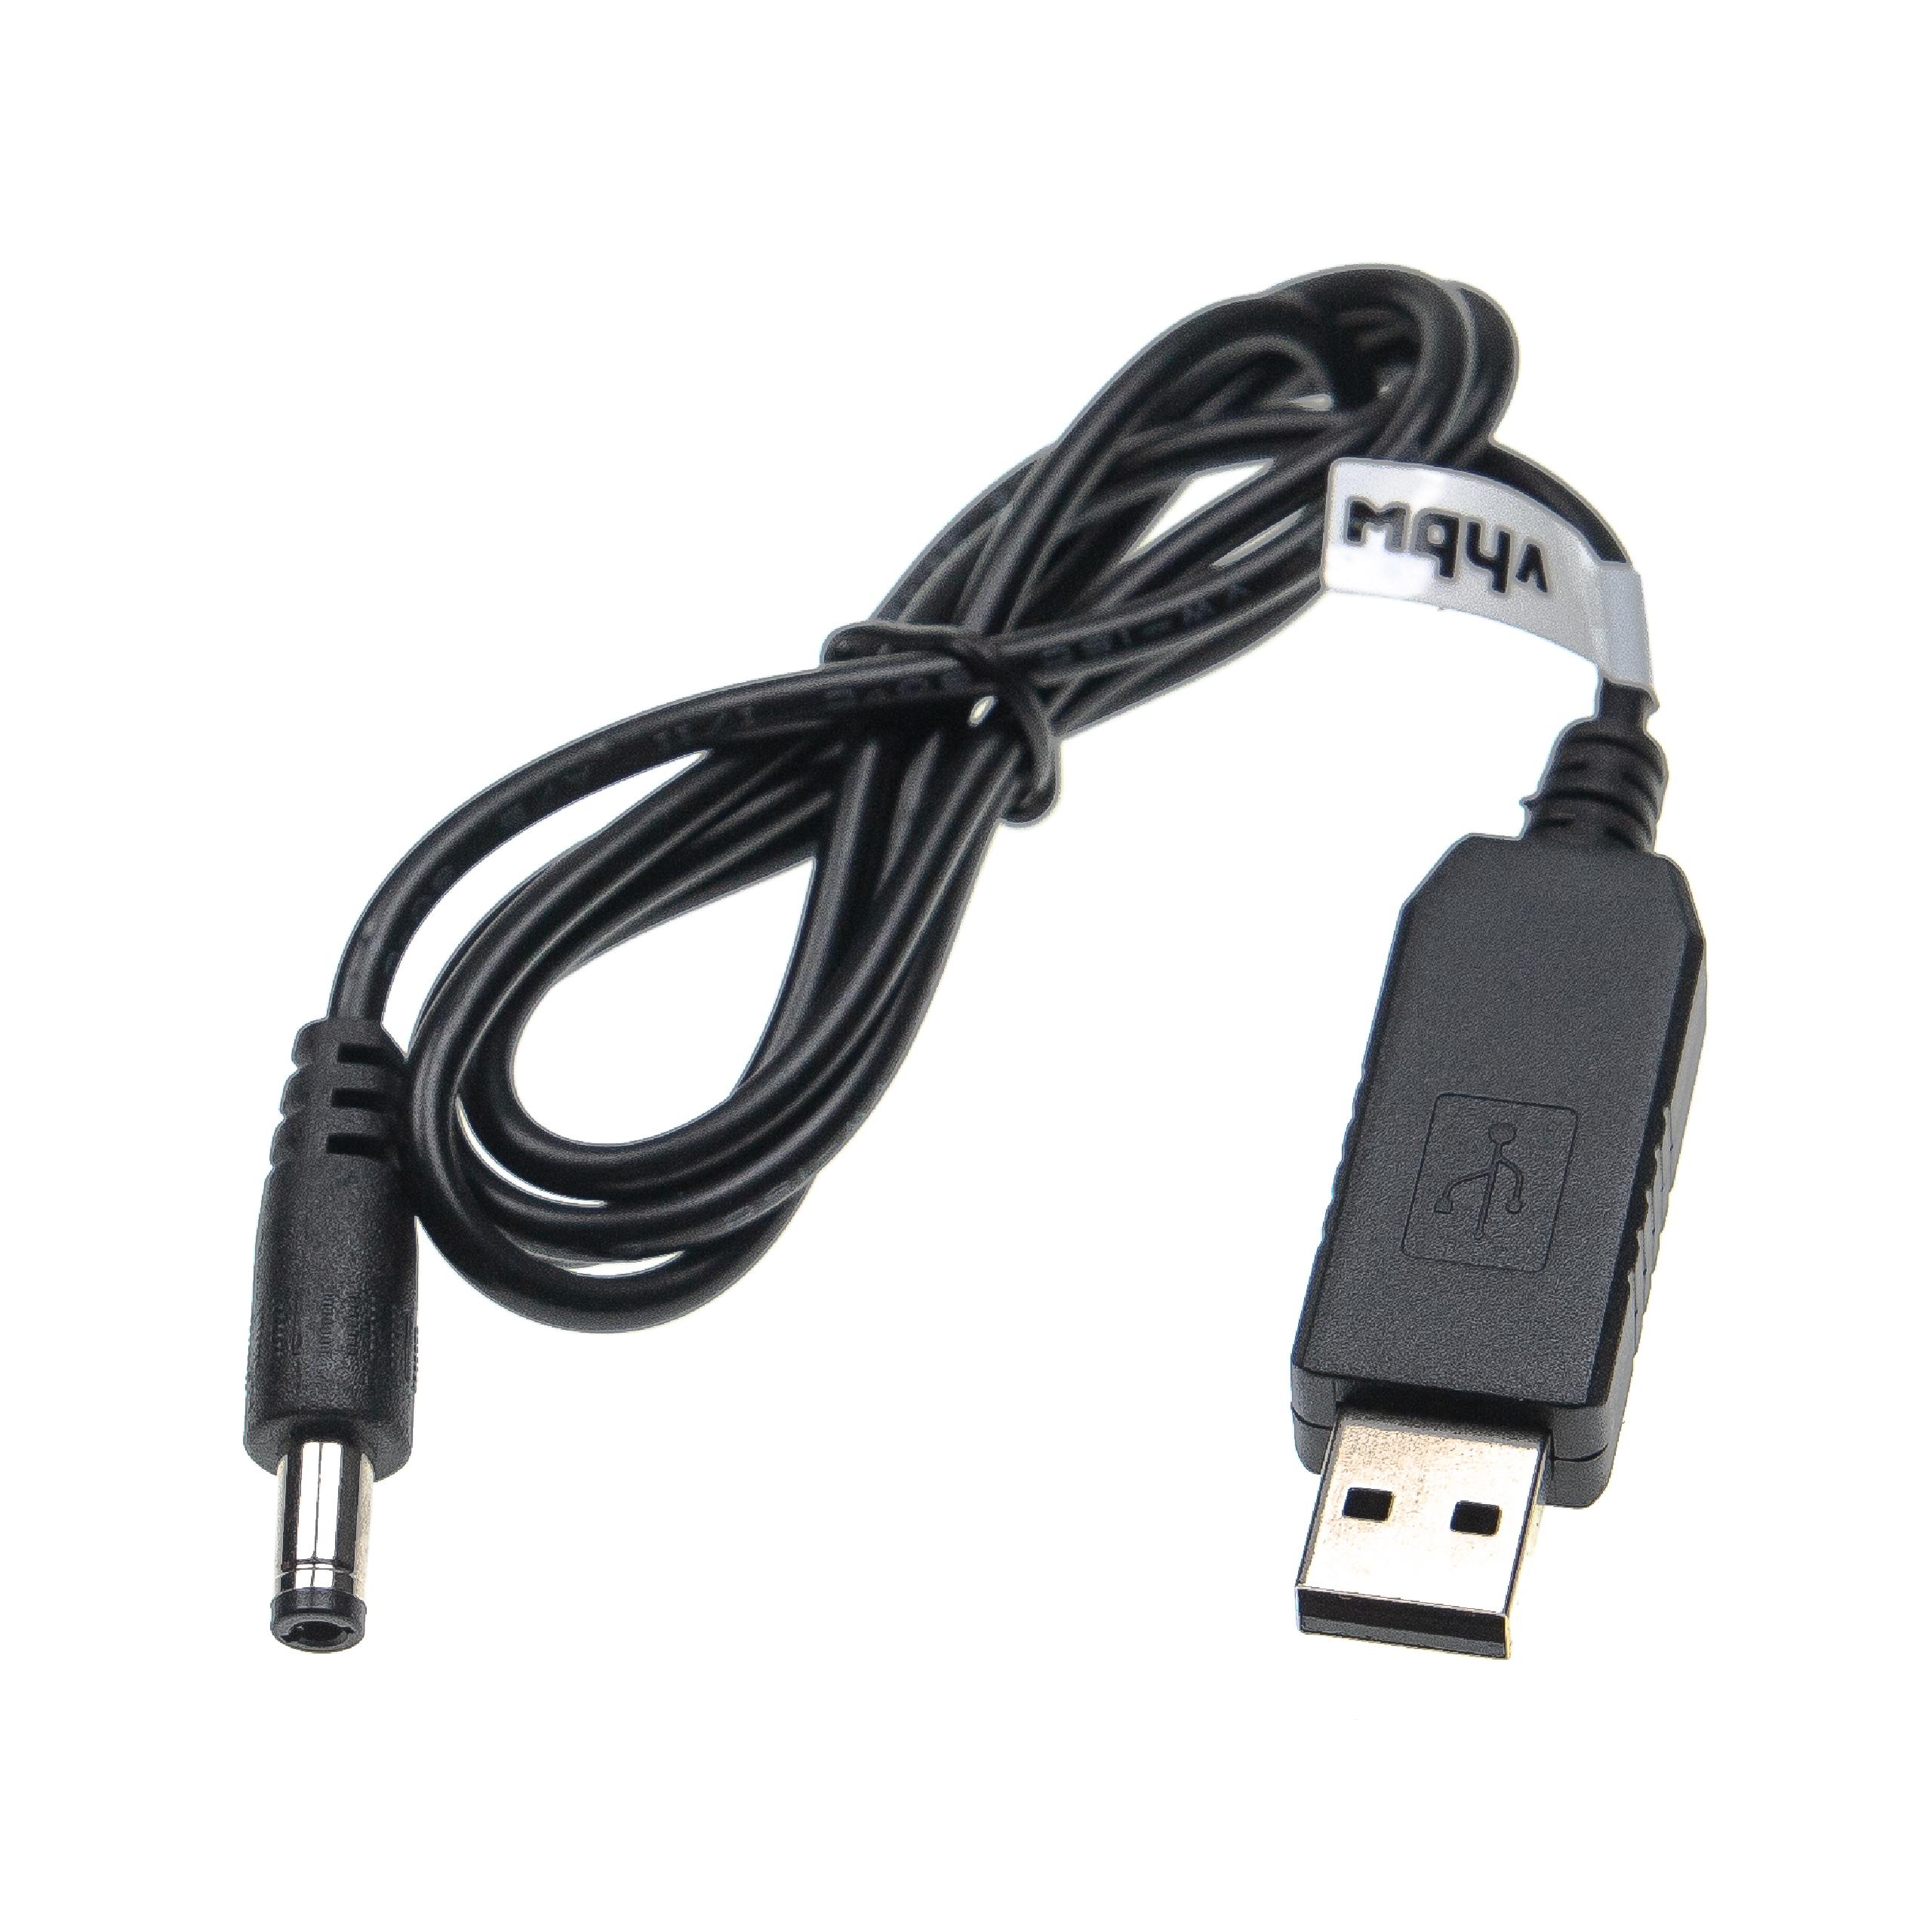 USB Charging Cable to 5.5 x 2.5 mm Barrel Connector - 5 V / 3 A to 12 V / 1 A 